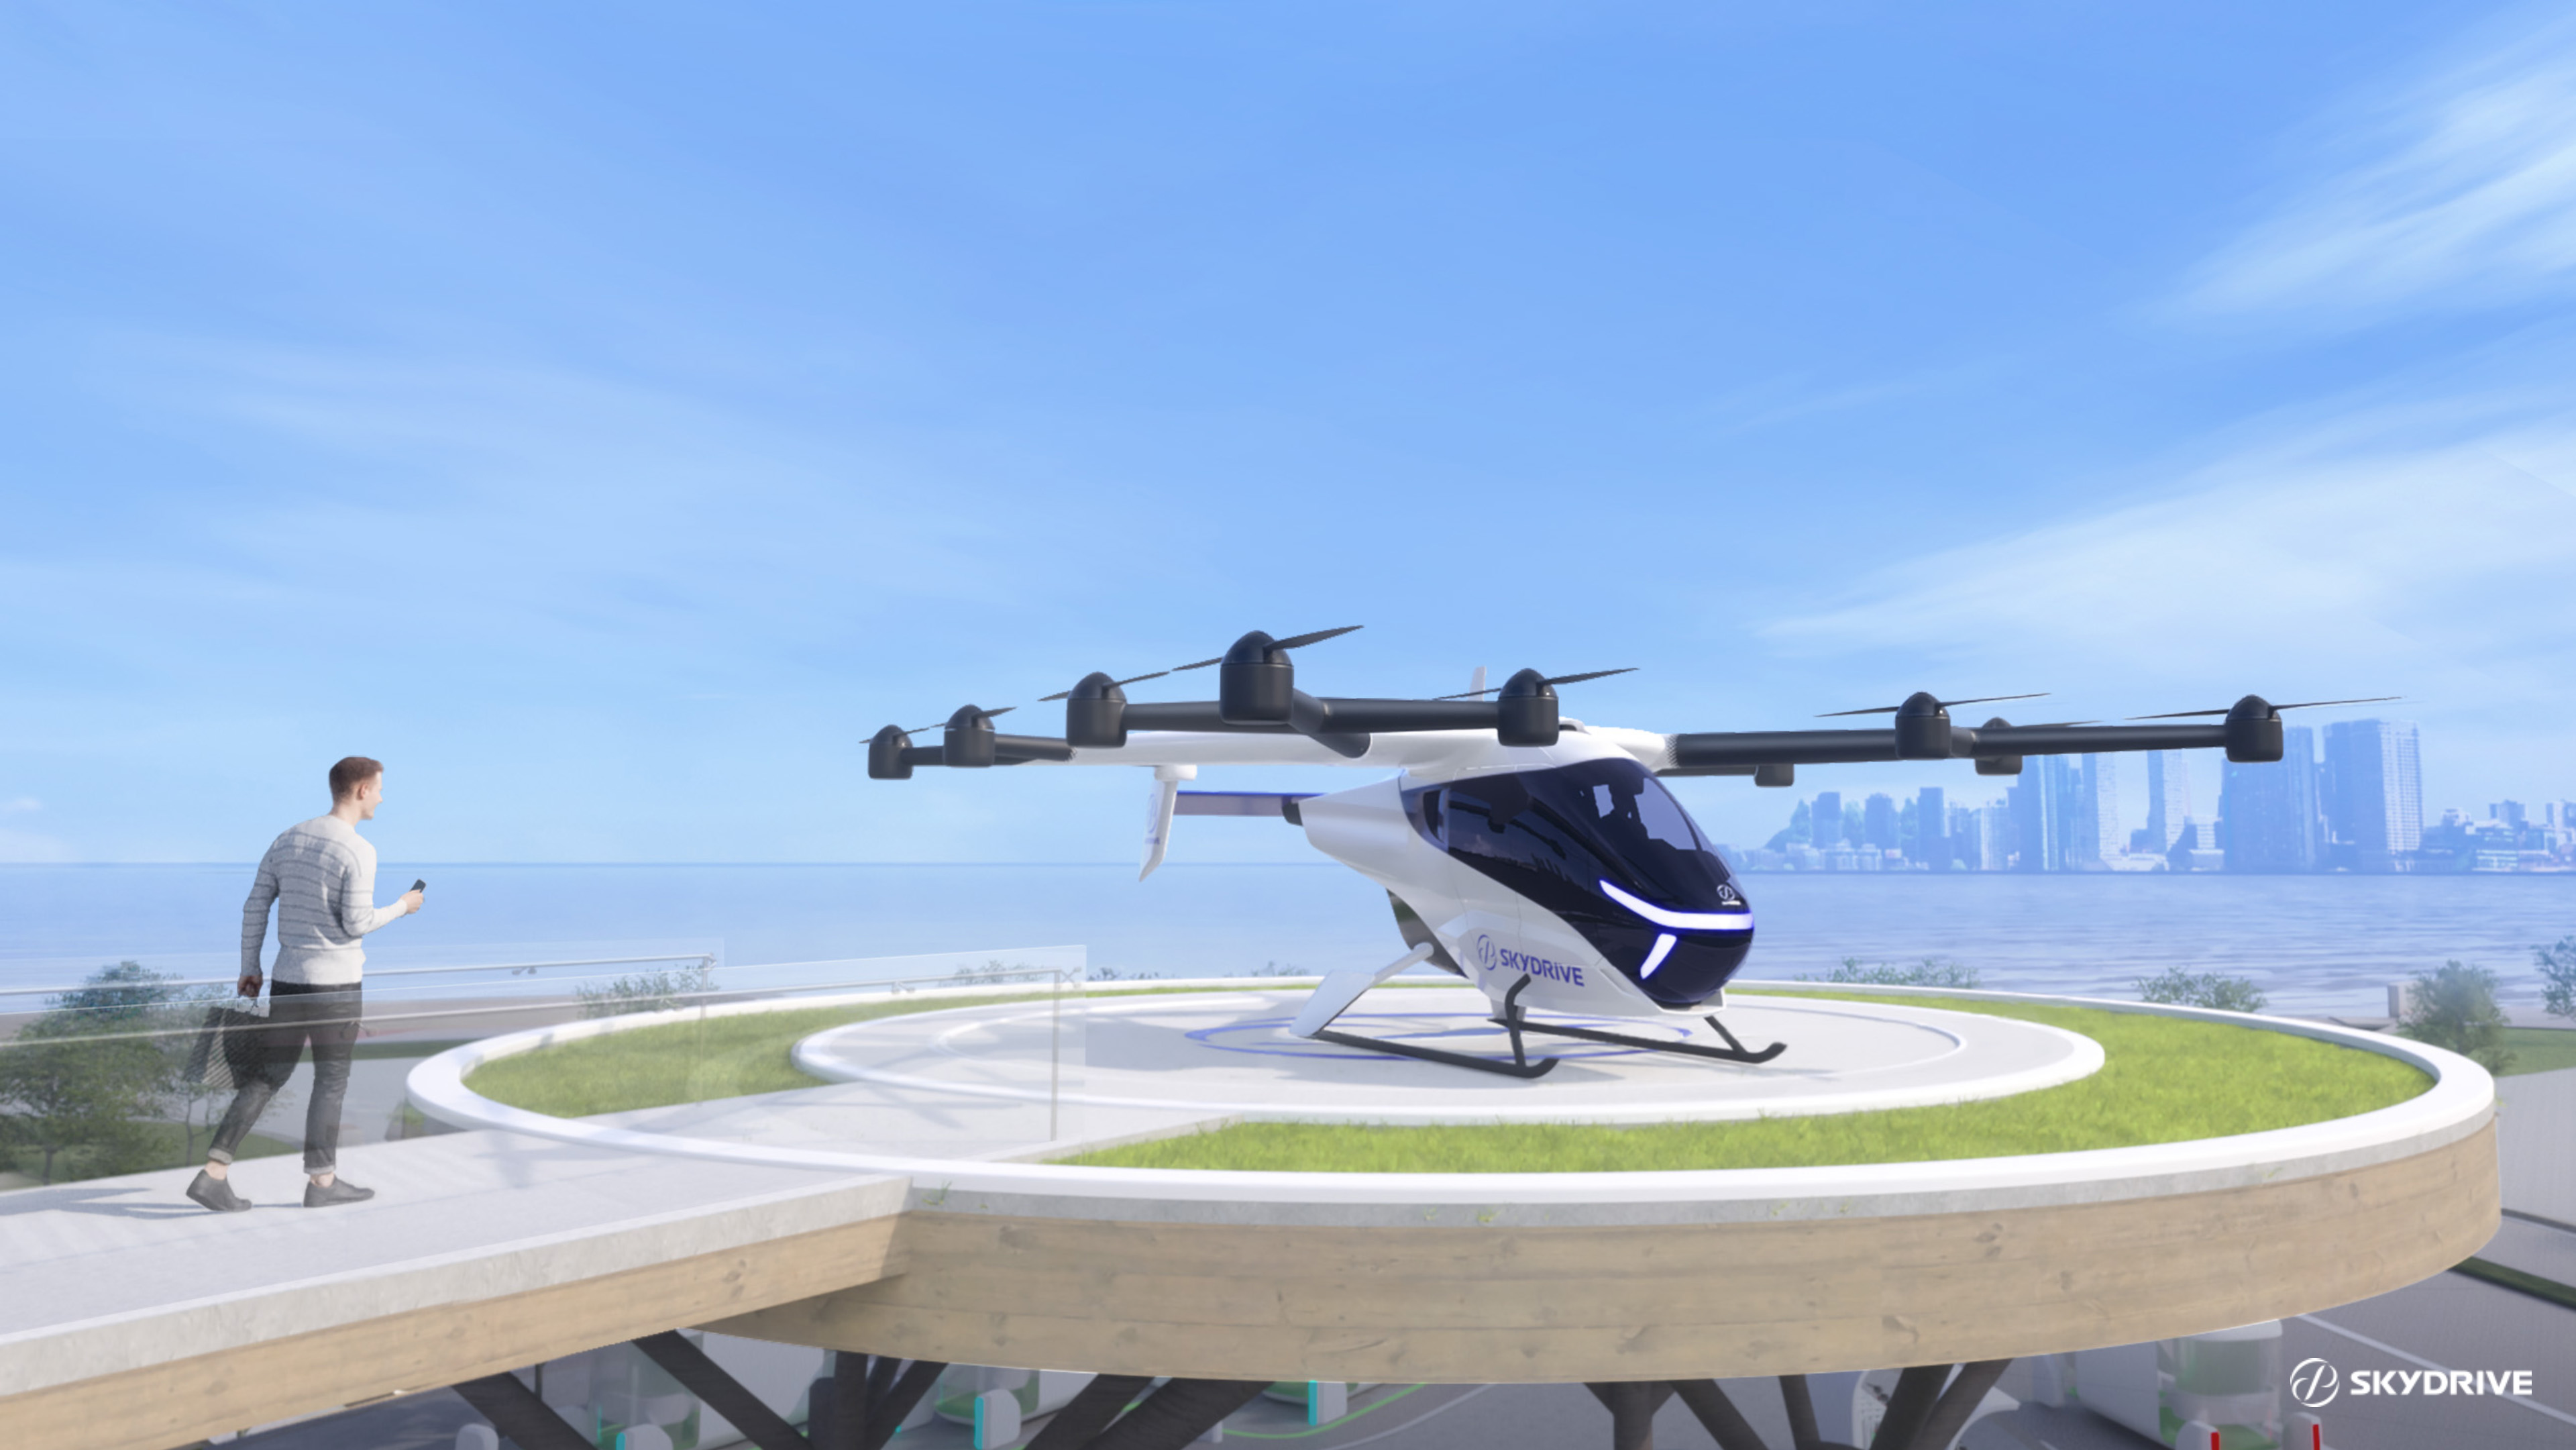 SD-05 the world's most accessible eVTOL